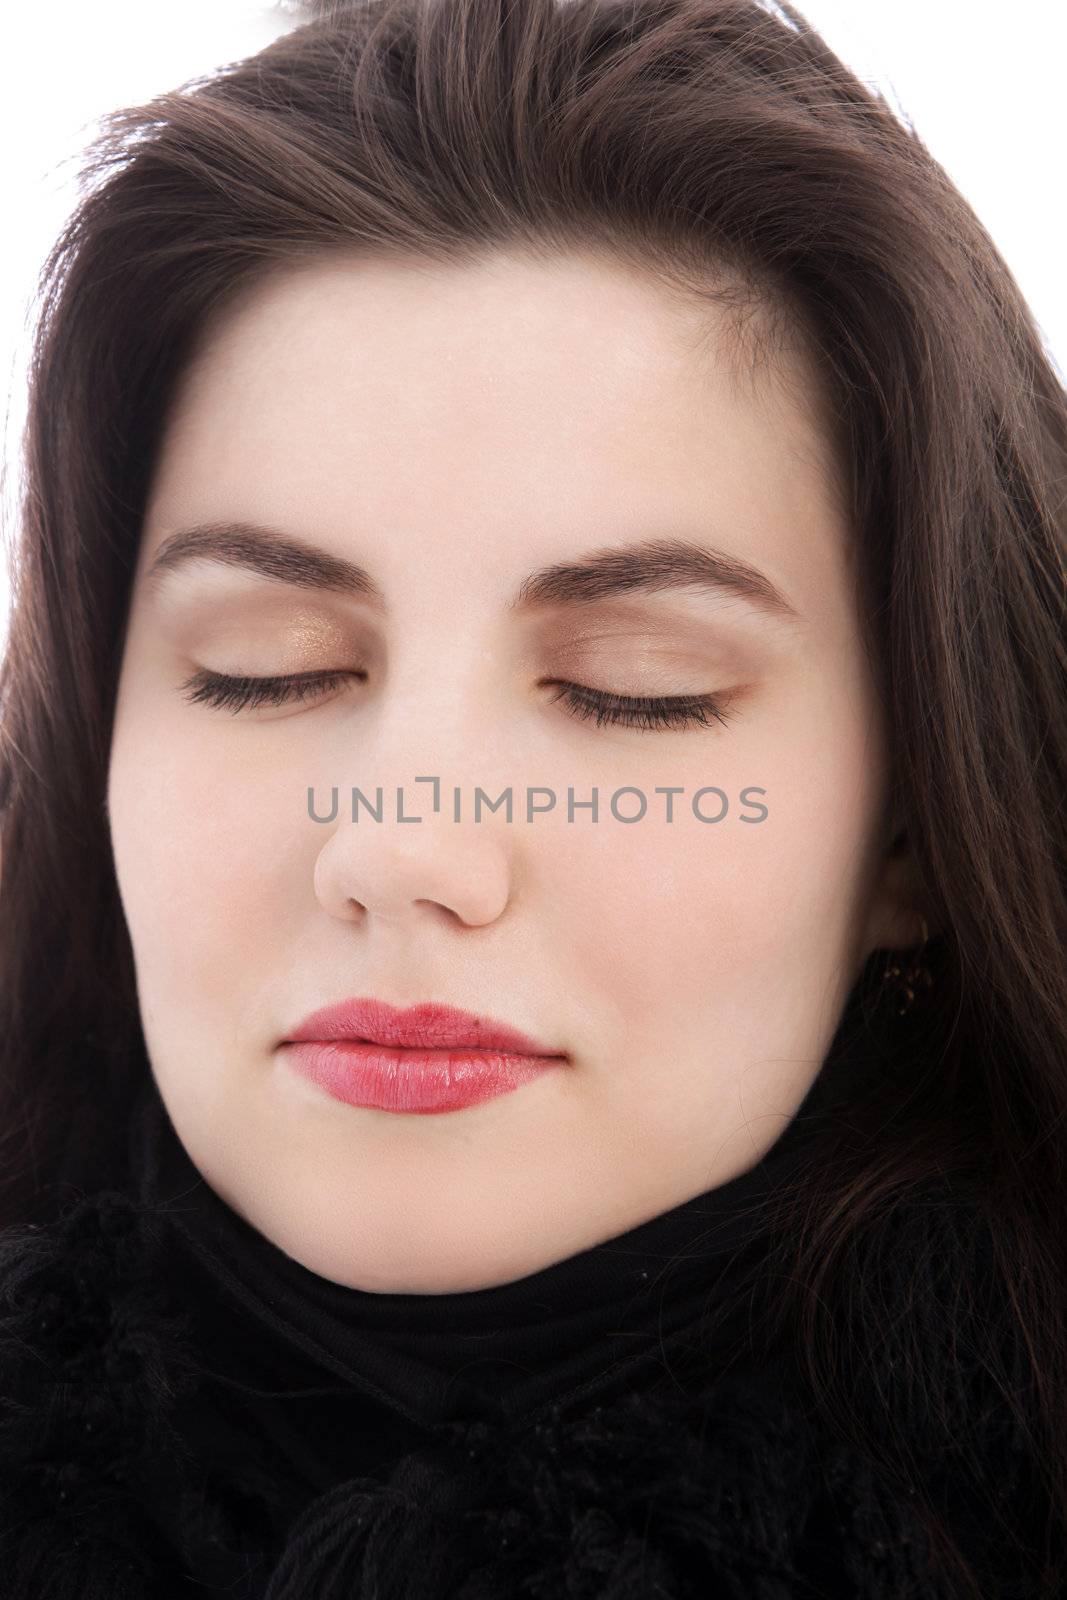 Relaxed young brunette woman meditating with eyes closed, close up